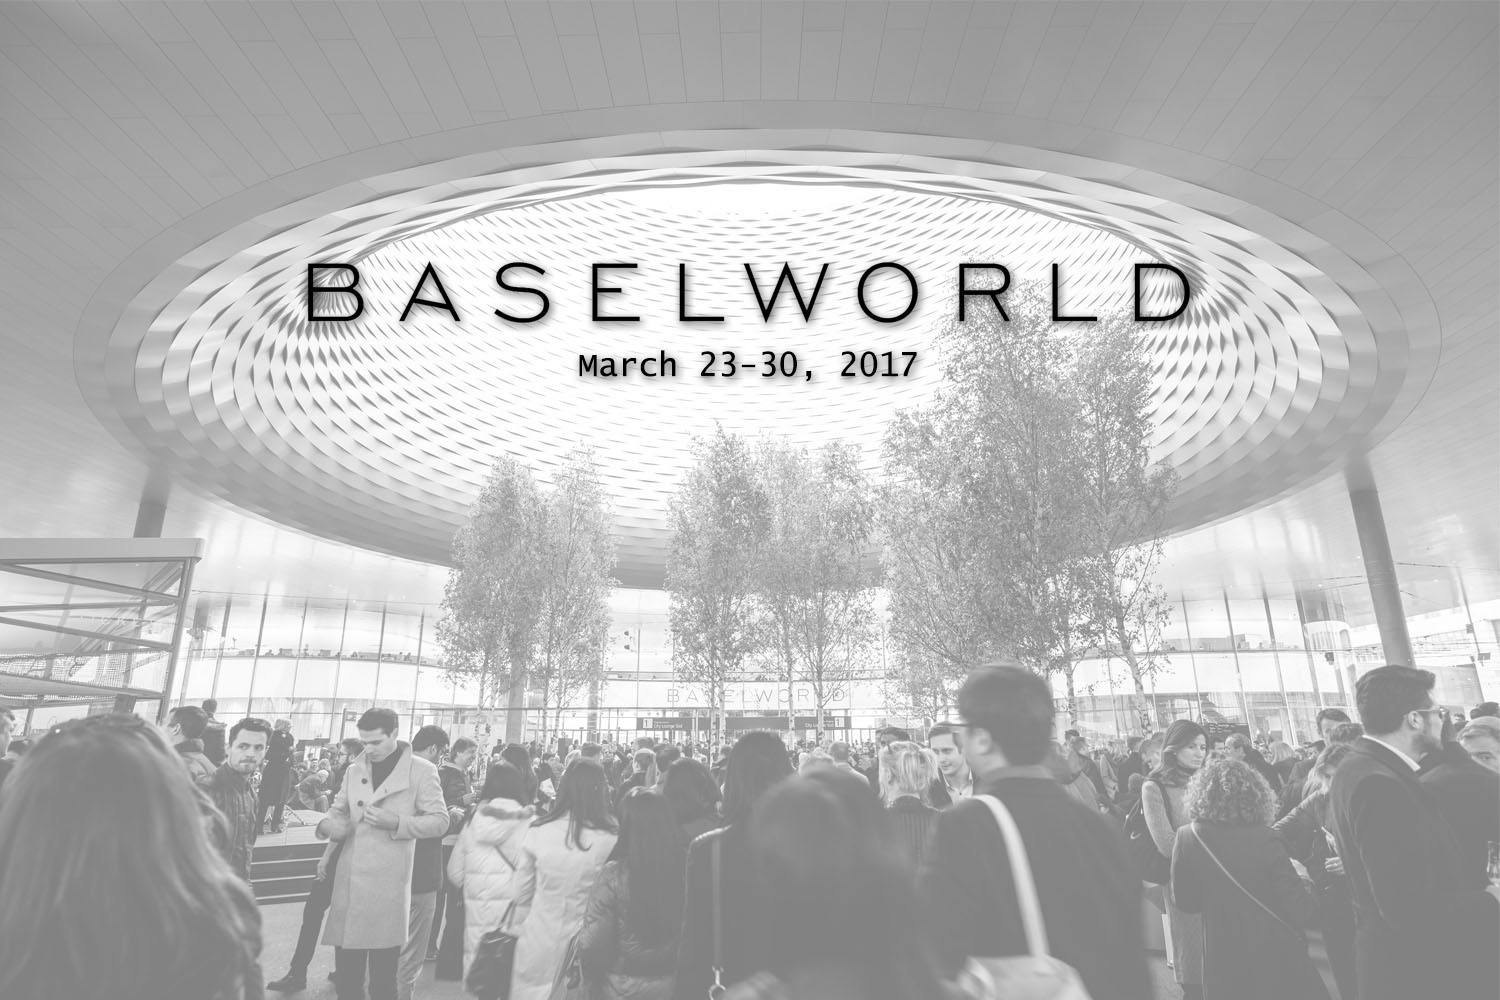 What to expect Baselworld 2017